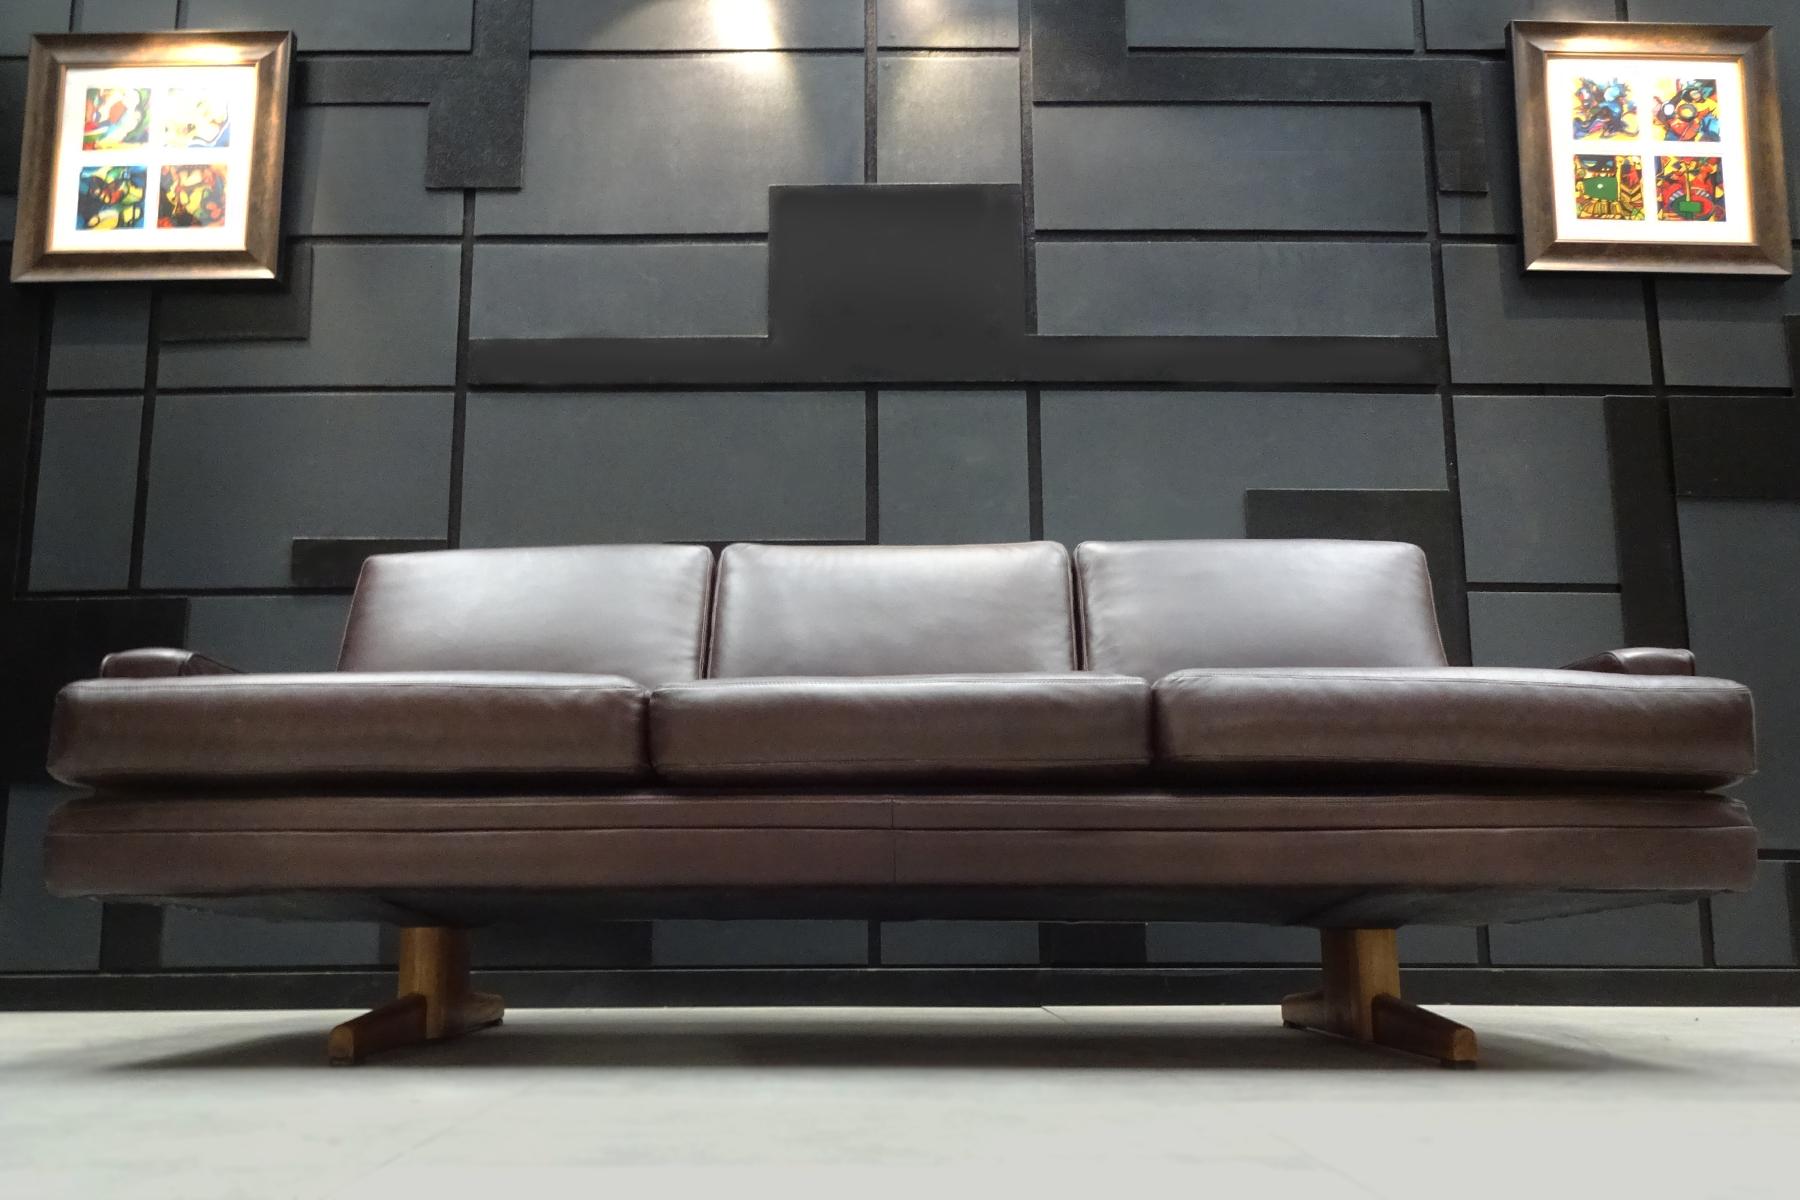 Midcentury leather sofa - sofa model 807 by Fredrik Kayser for Vatne Mobler, Norway. 

A high-quality and rare sofa of generous proportions with ski back sides upholstered in a dark chocolate leather with hints of dark burgundy. The sofa rests on